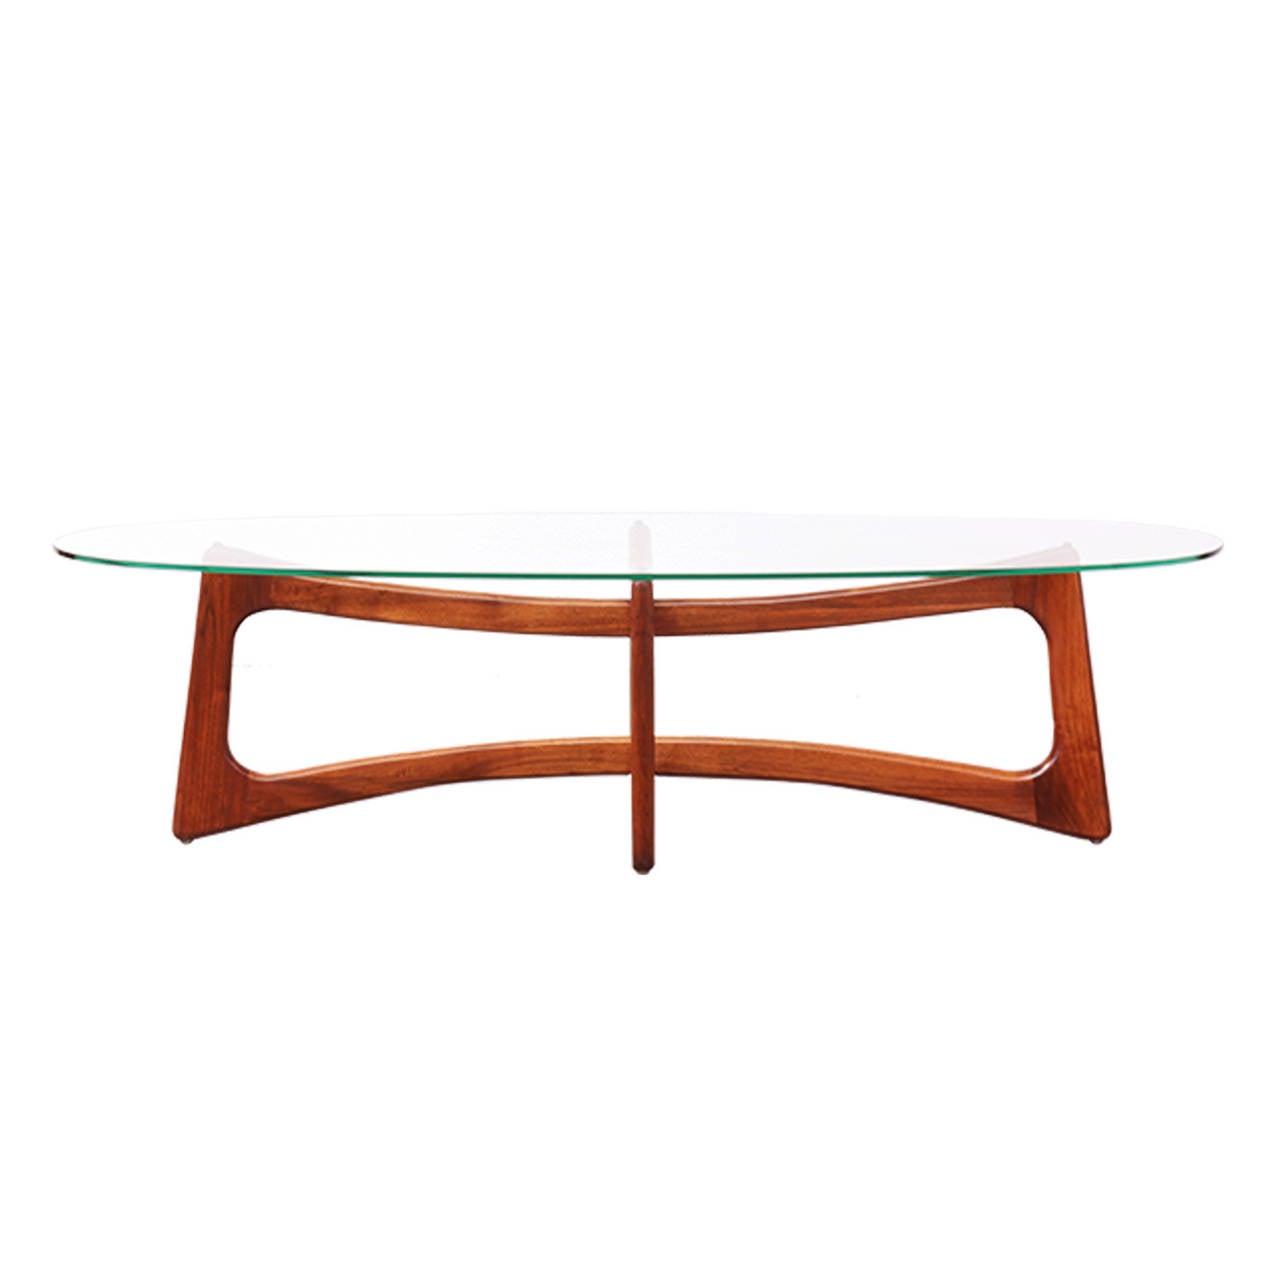 Designer: Adrian Pearsall
Manufacturer: Craft Associates
Period/Style: Mid Century Modern
Country: United States
Date: 1950’s

Dimensions: 16″H x 59″L x 19.75″W
Materials: Walnut, Glass
Condition: Excellent – Newly Refinished